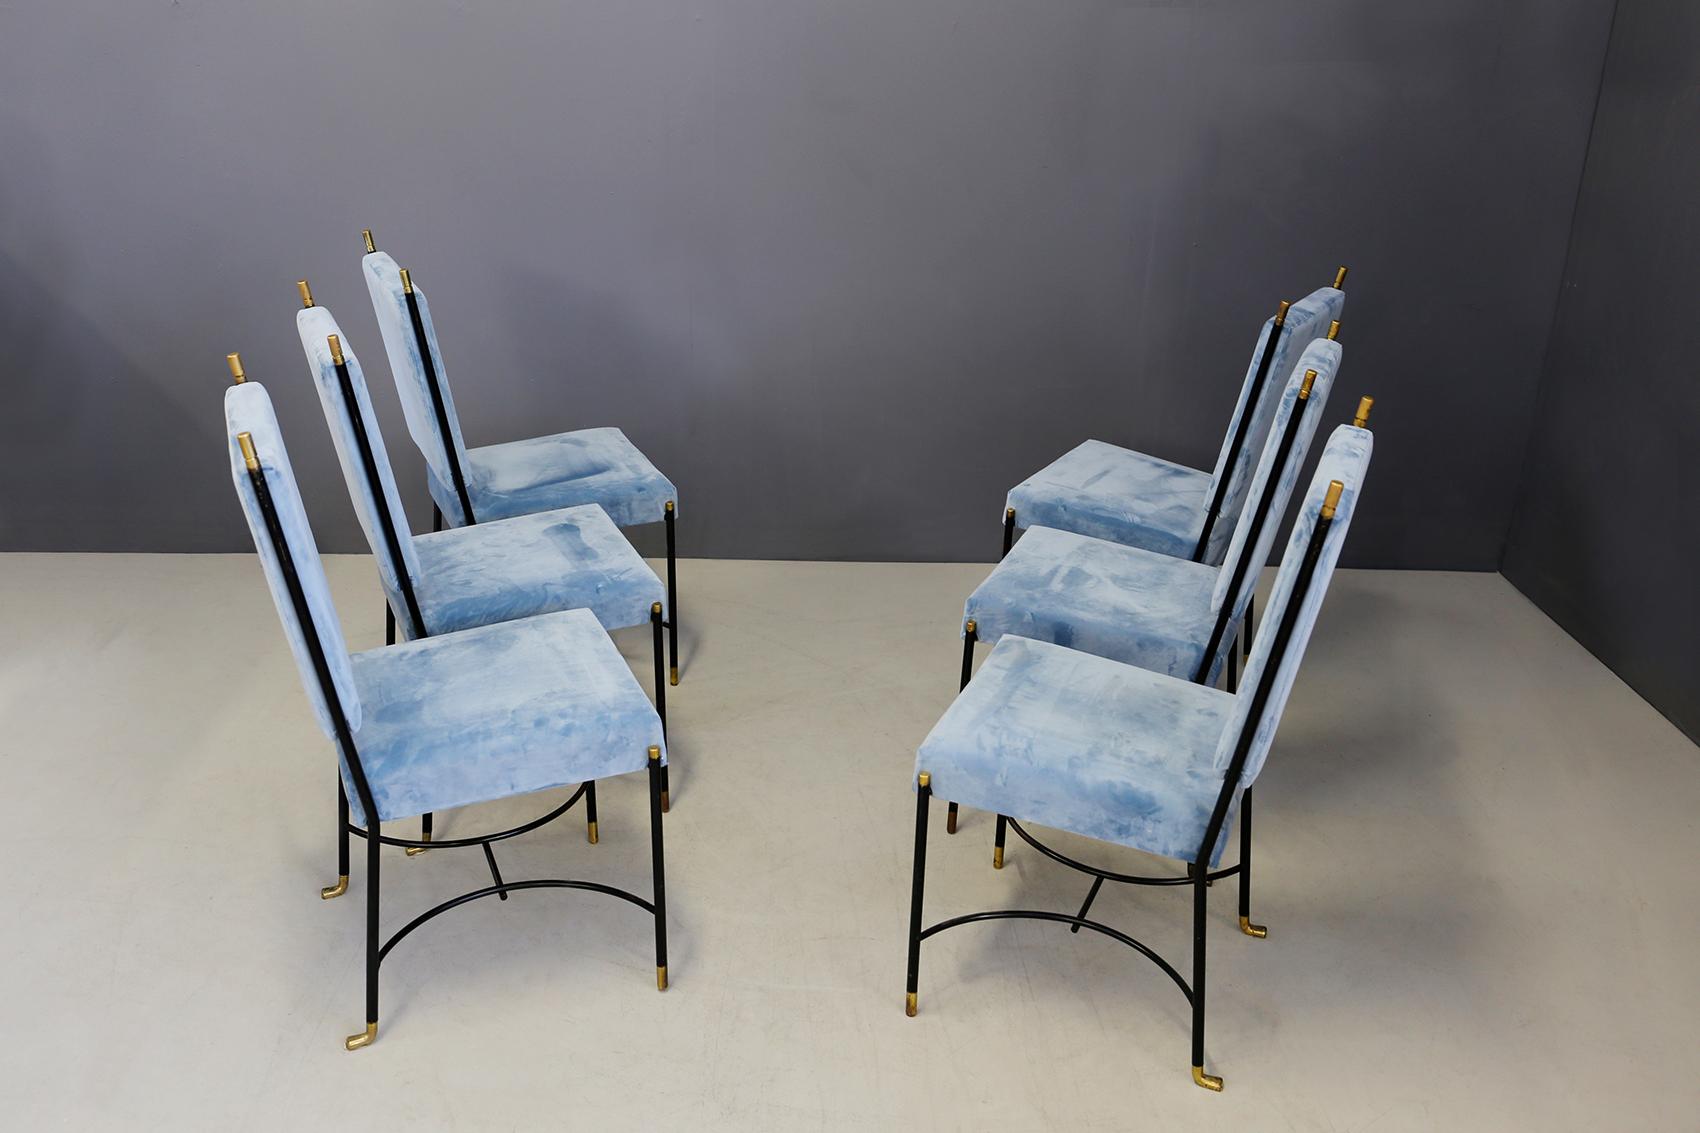 Elegant set of six Bertrand chairs from 1950 Paris. The chairs are made of black lacquered wrought iron and brass tips. The backrest and seat have been restored in a beautiful blue-blue velvet. The peculiarity of this seat are the brass tips and the